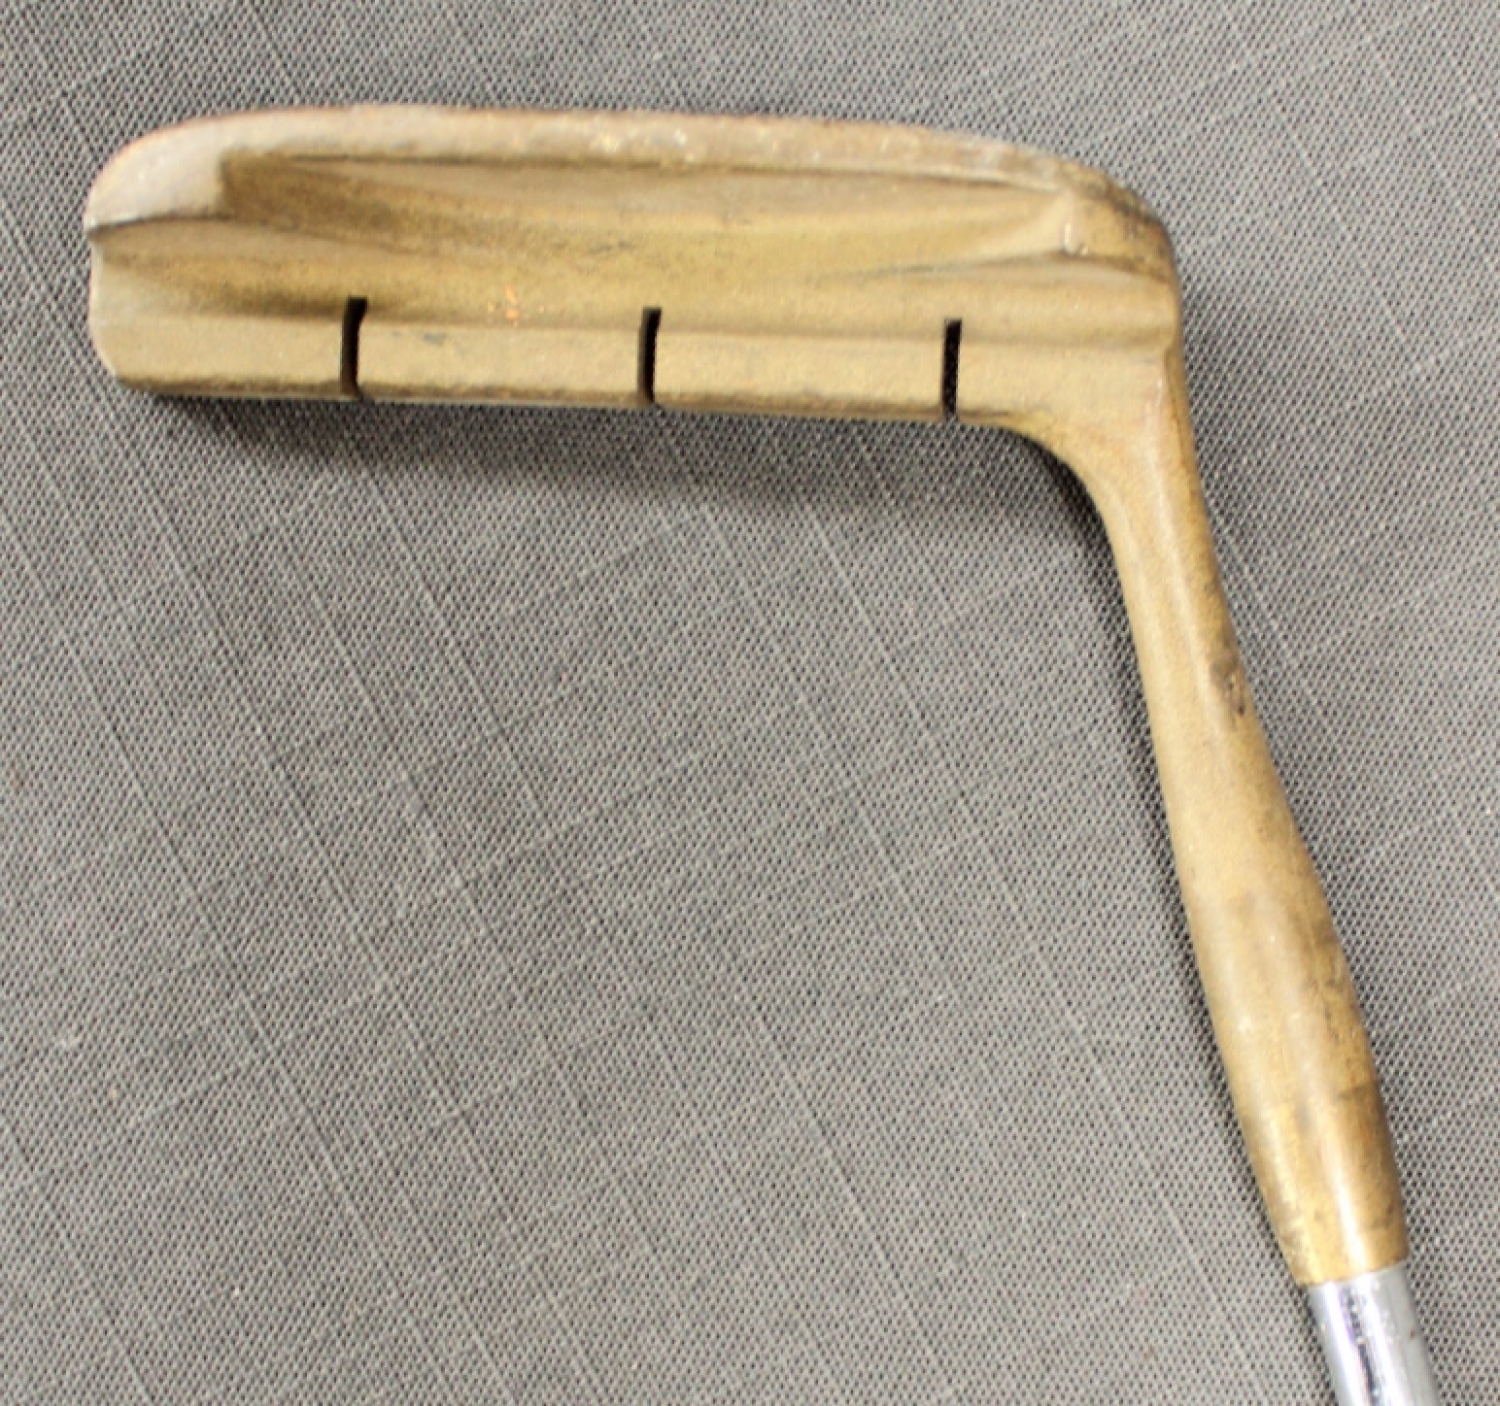 A vintage Ray Cook MG-1 putter